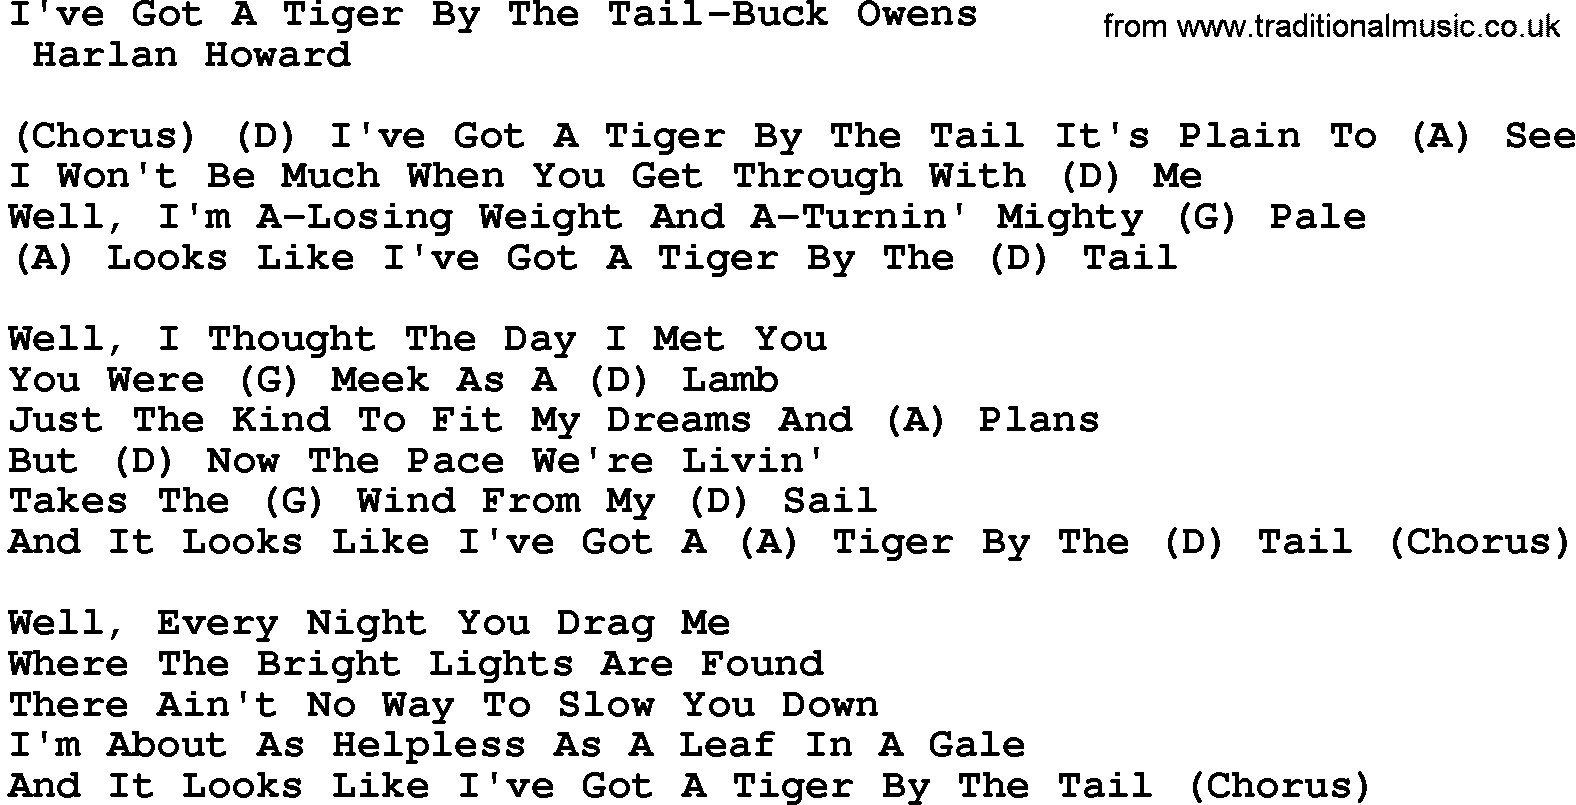 Country music song: I've Got A Tiger By The Tail-Buck Owens lyrics and chords